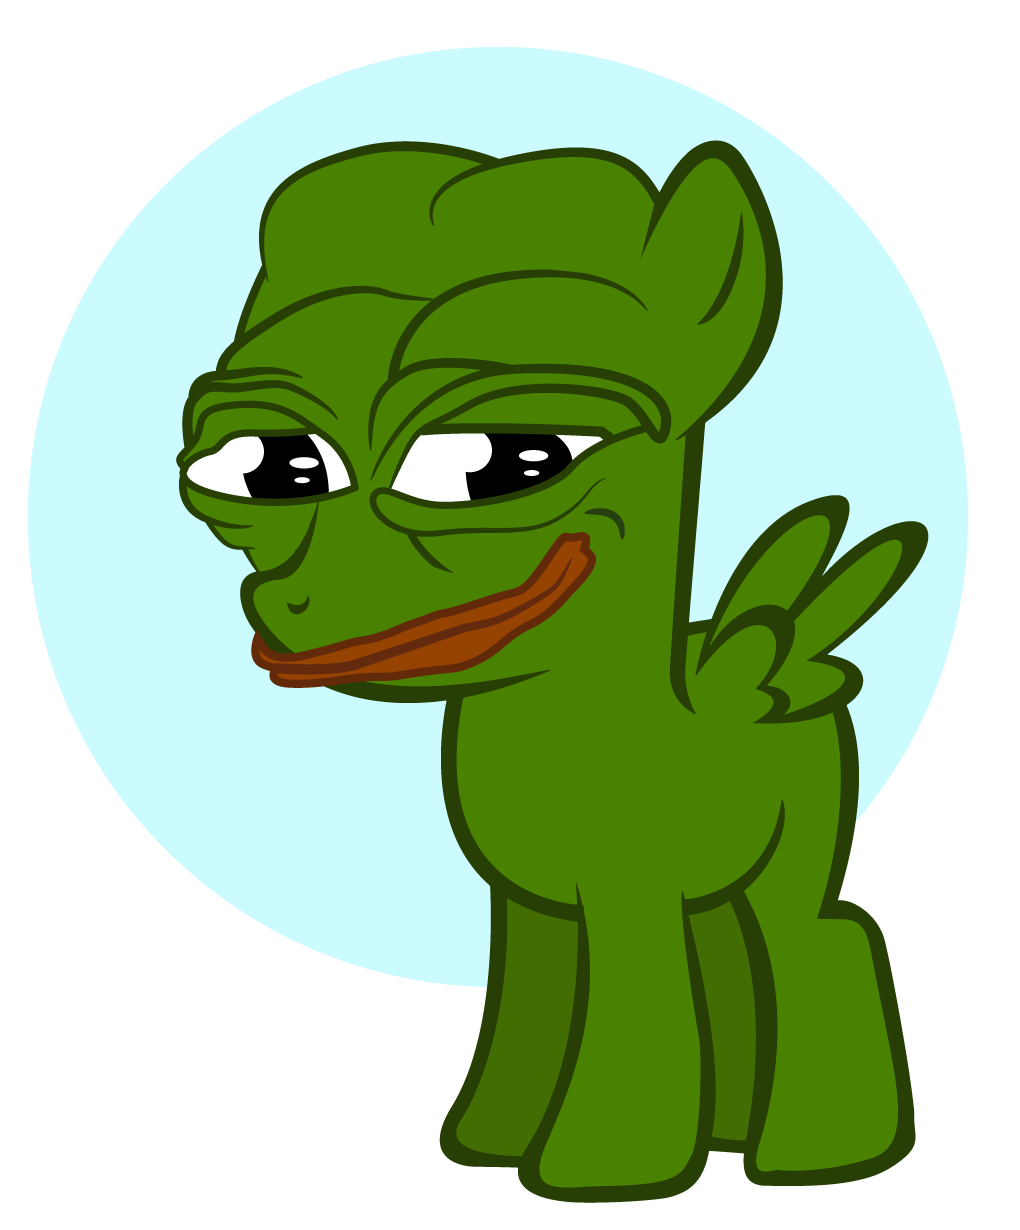 1181516 Meme Not Salmon Pepe The Frog Ponified Safe Wat What